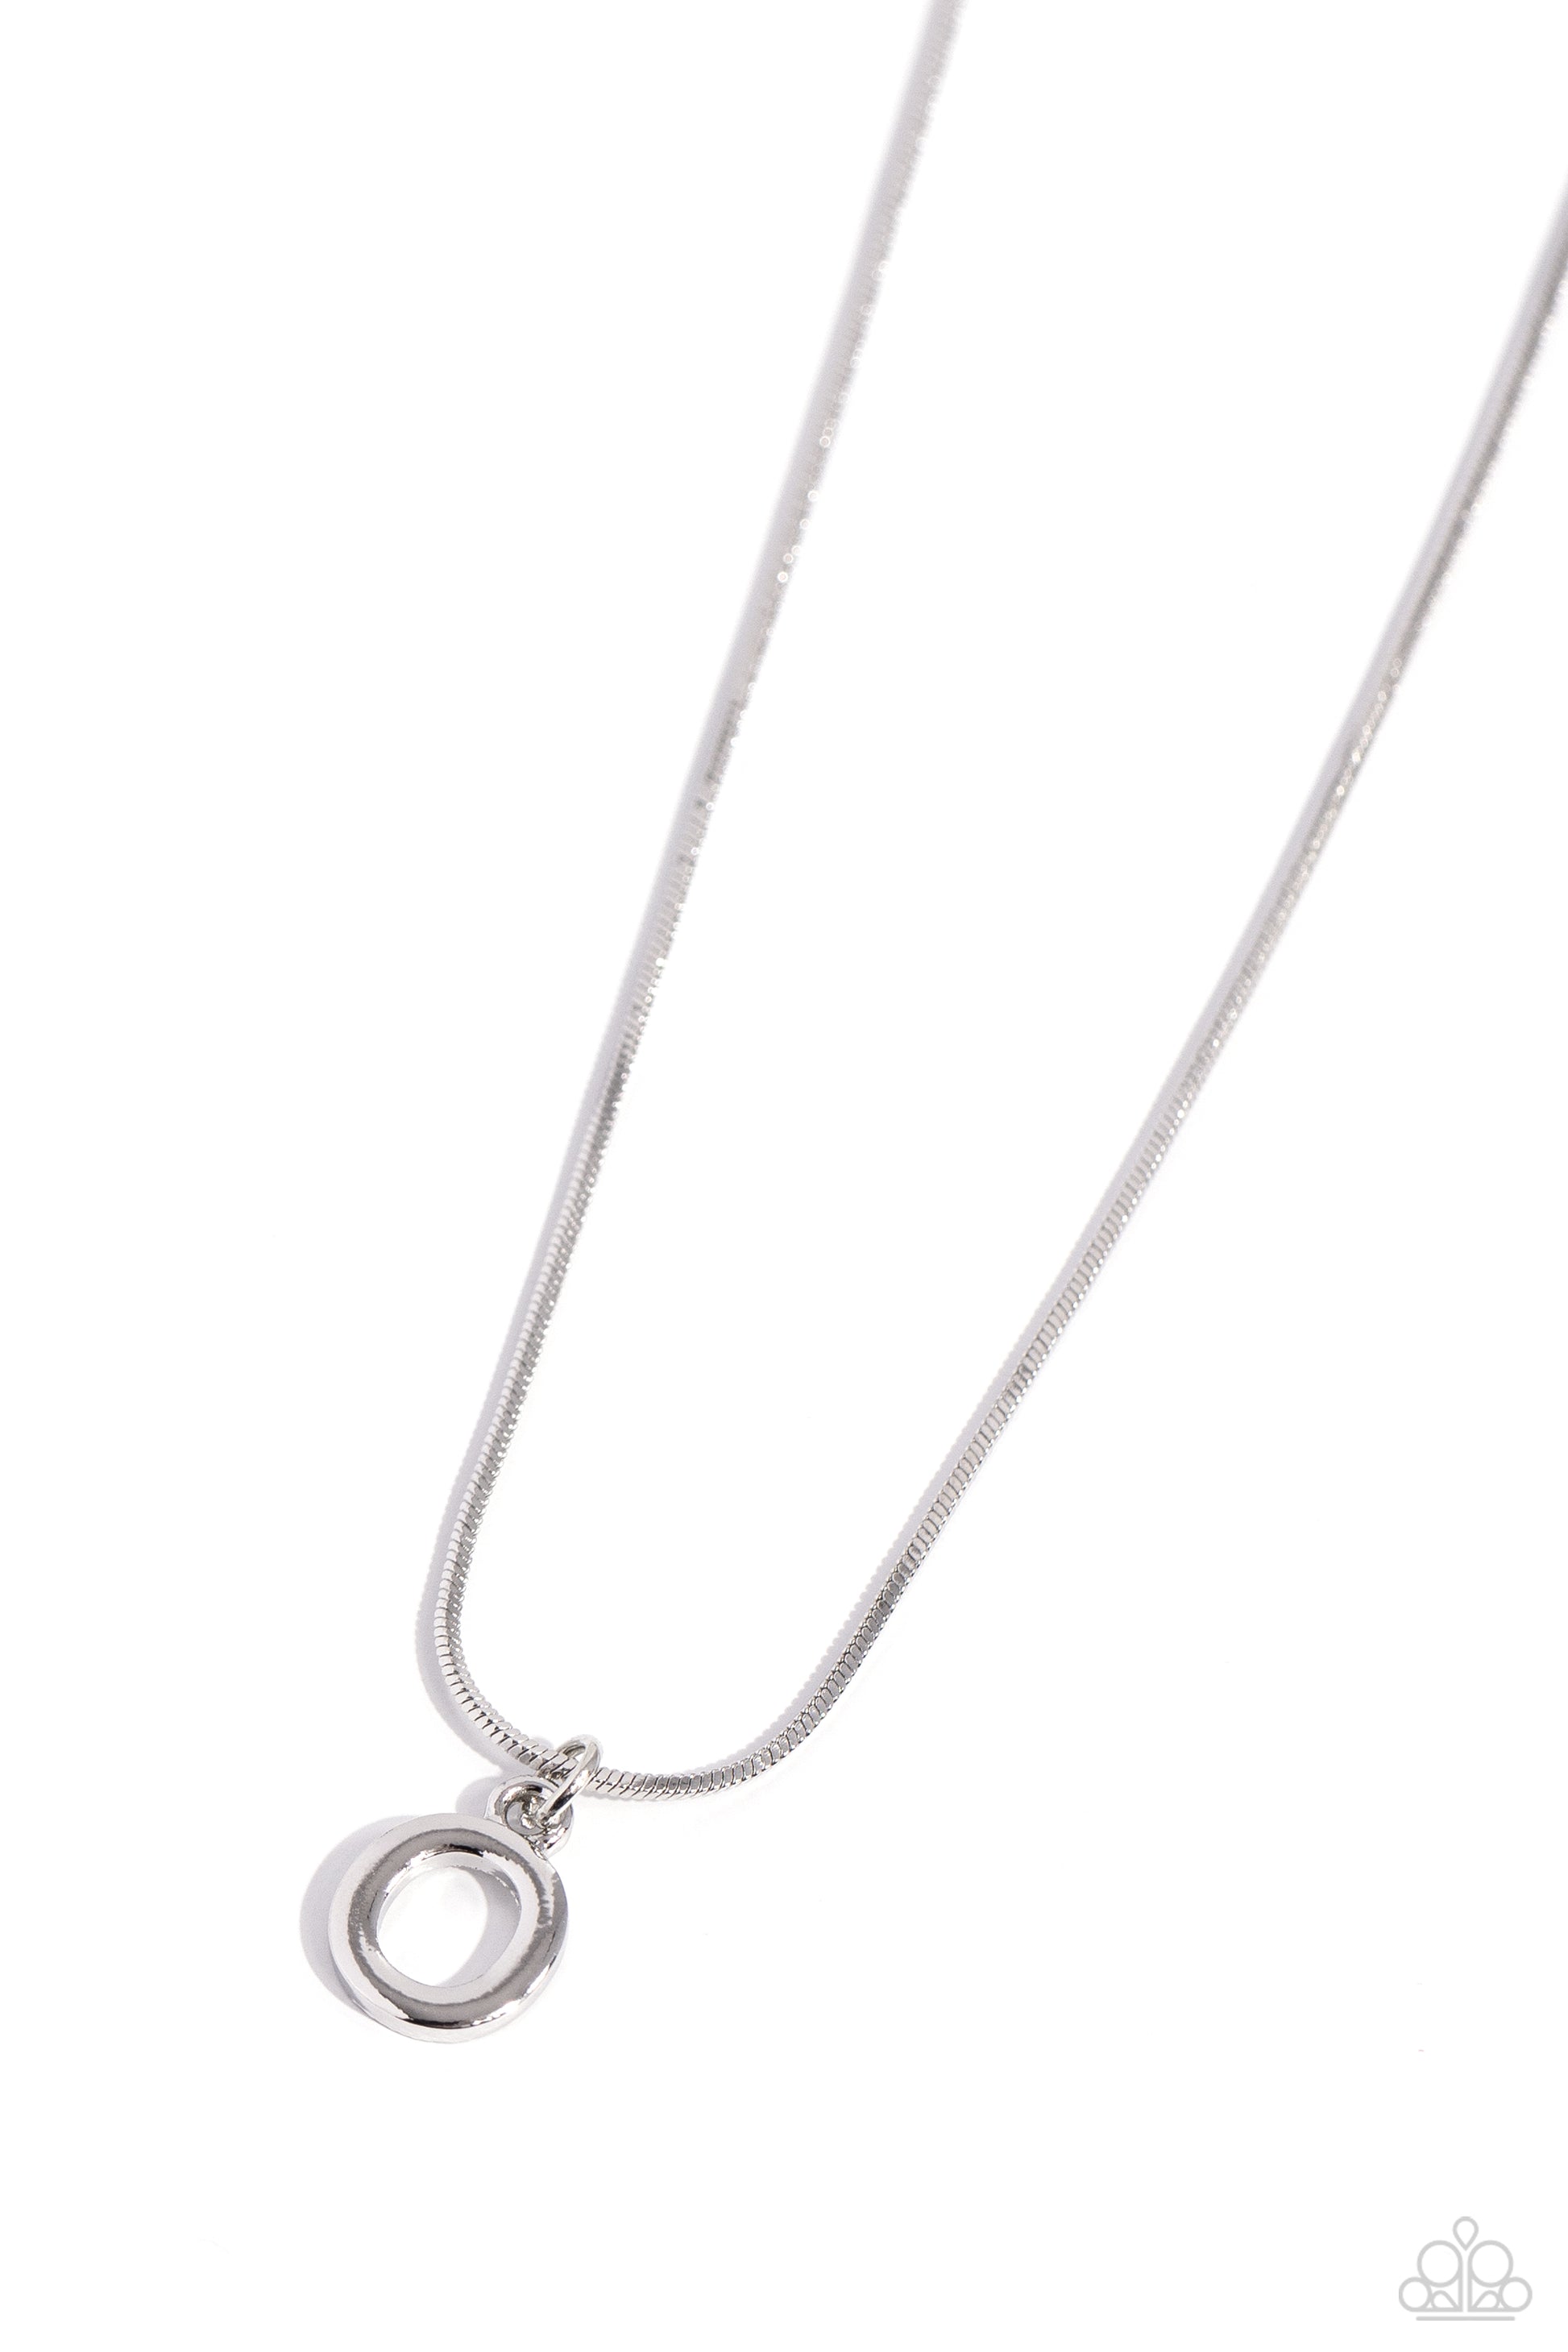 Seize the Initial - silver - O - Paparazzi necklace – JewelryBlingThing